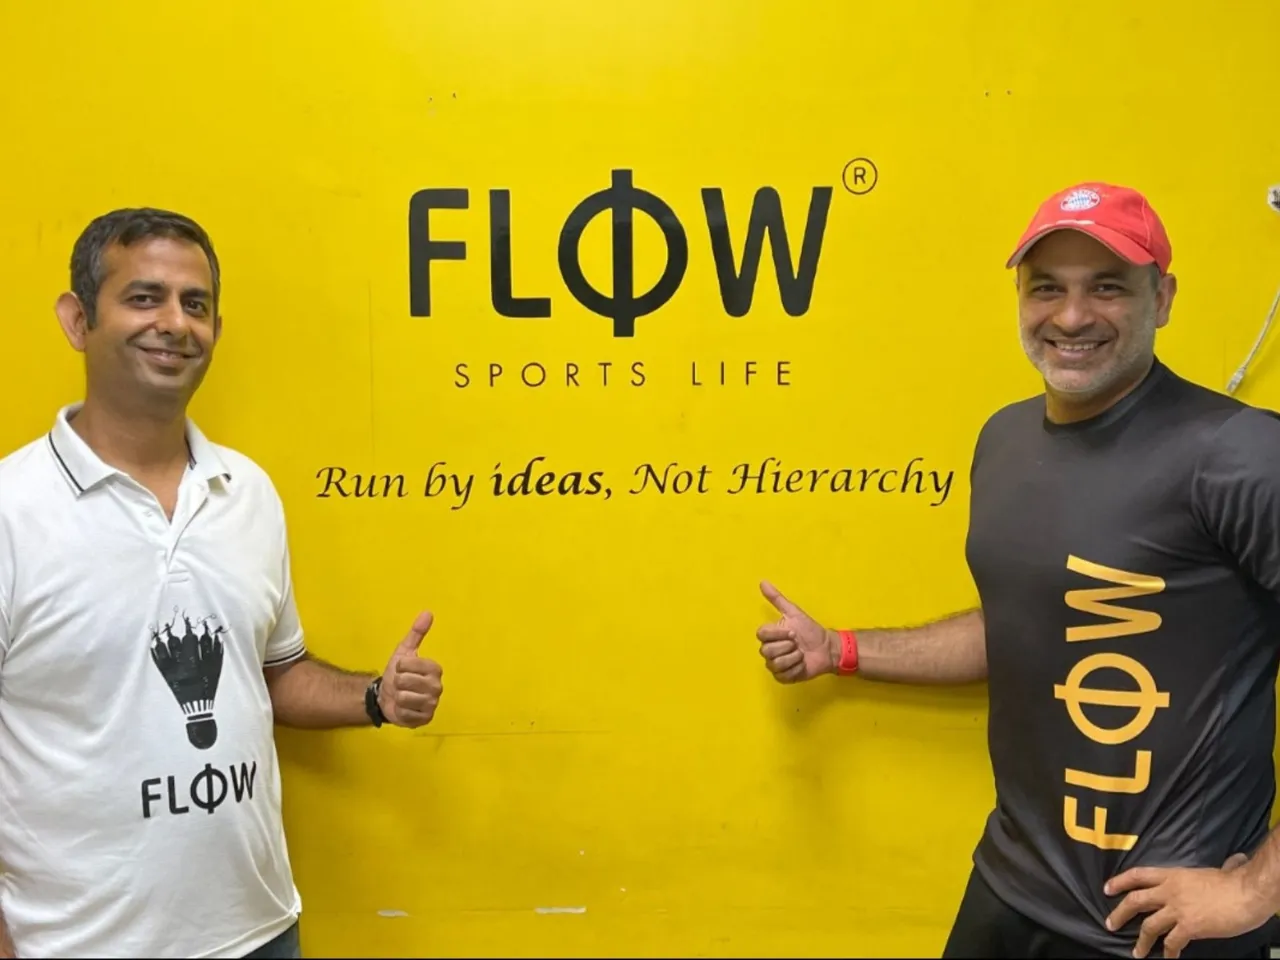  Flow Sports Life Founders Amit Mongia and Sumit Garg